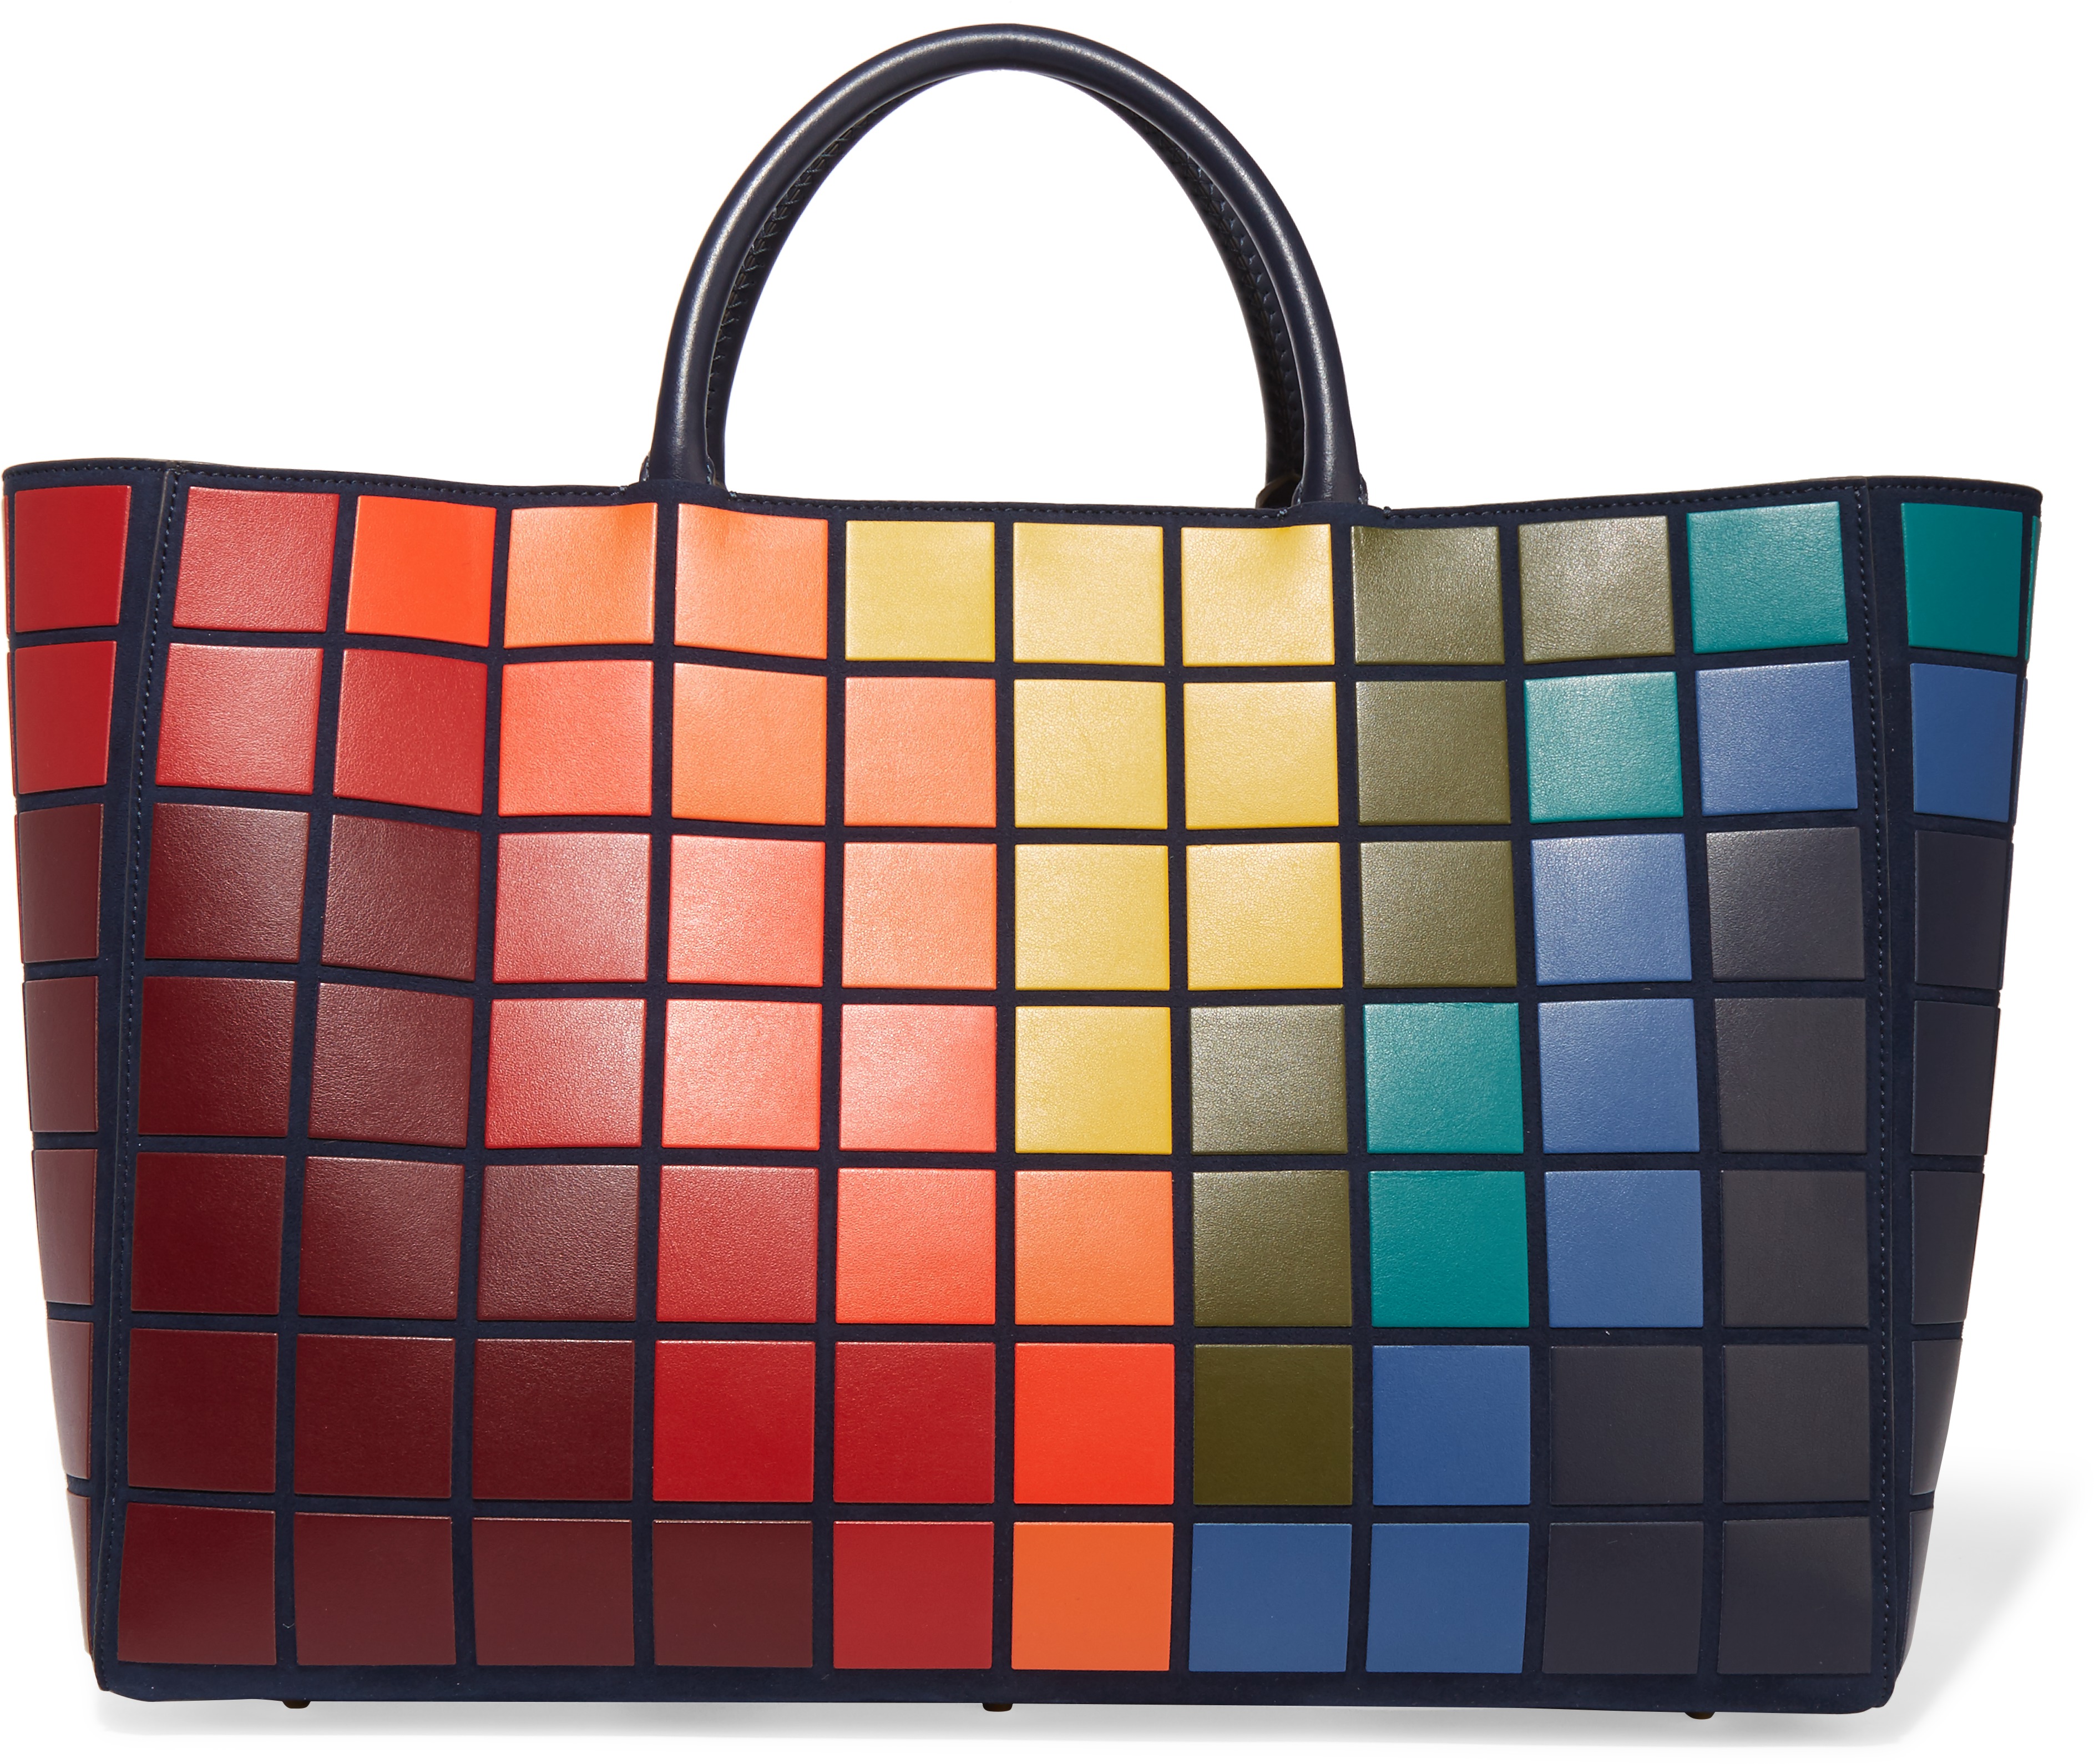 net-a-porter_anya-hindmarch-ebury-maxi-pixels-leather-totes